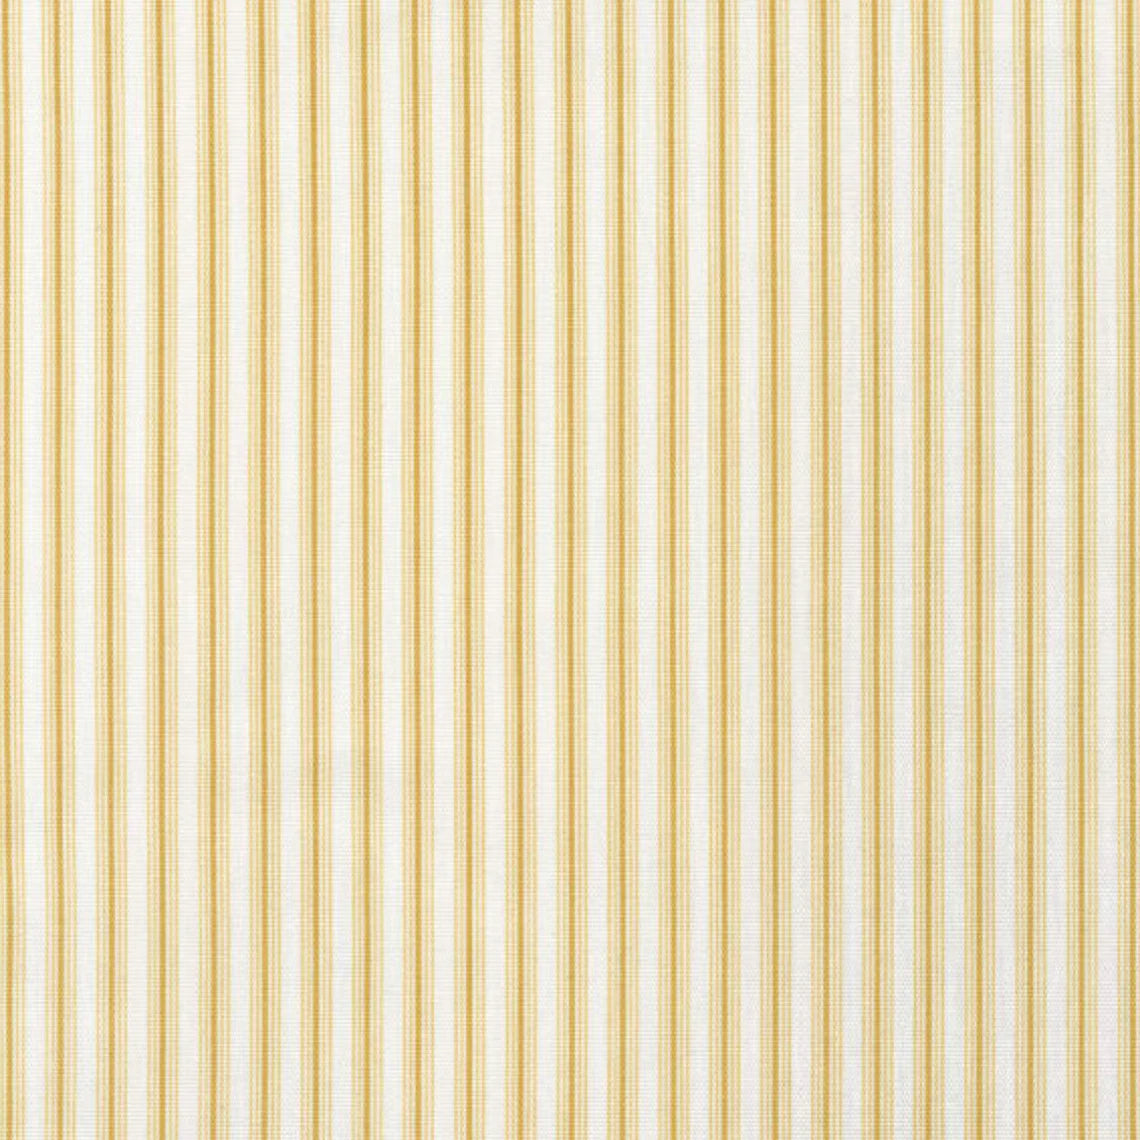 duvet cover in cottage barley yellow gold stripe